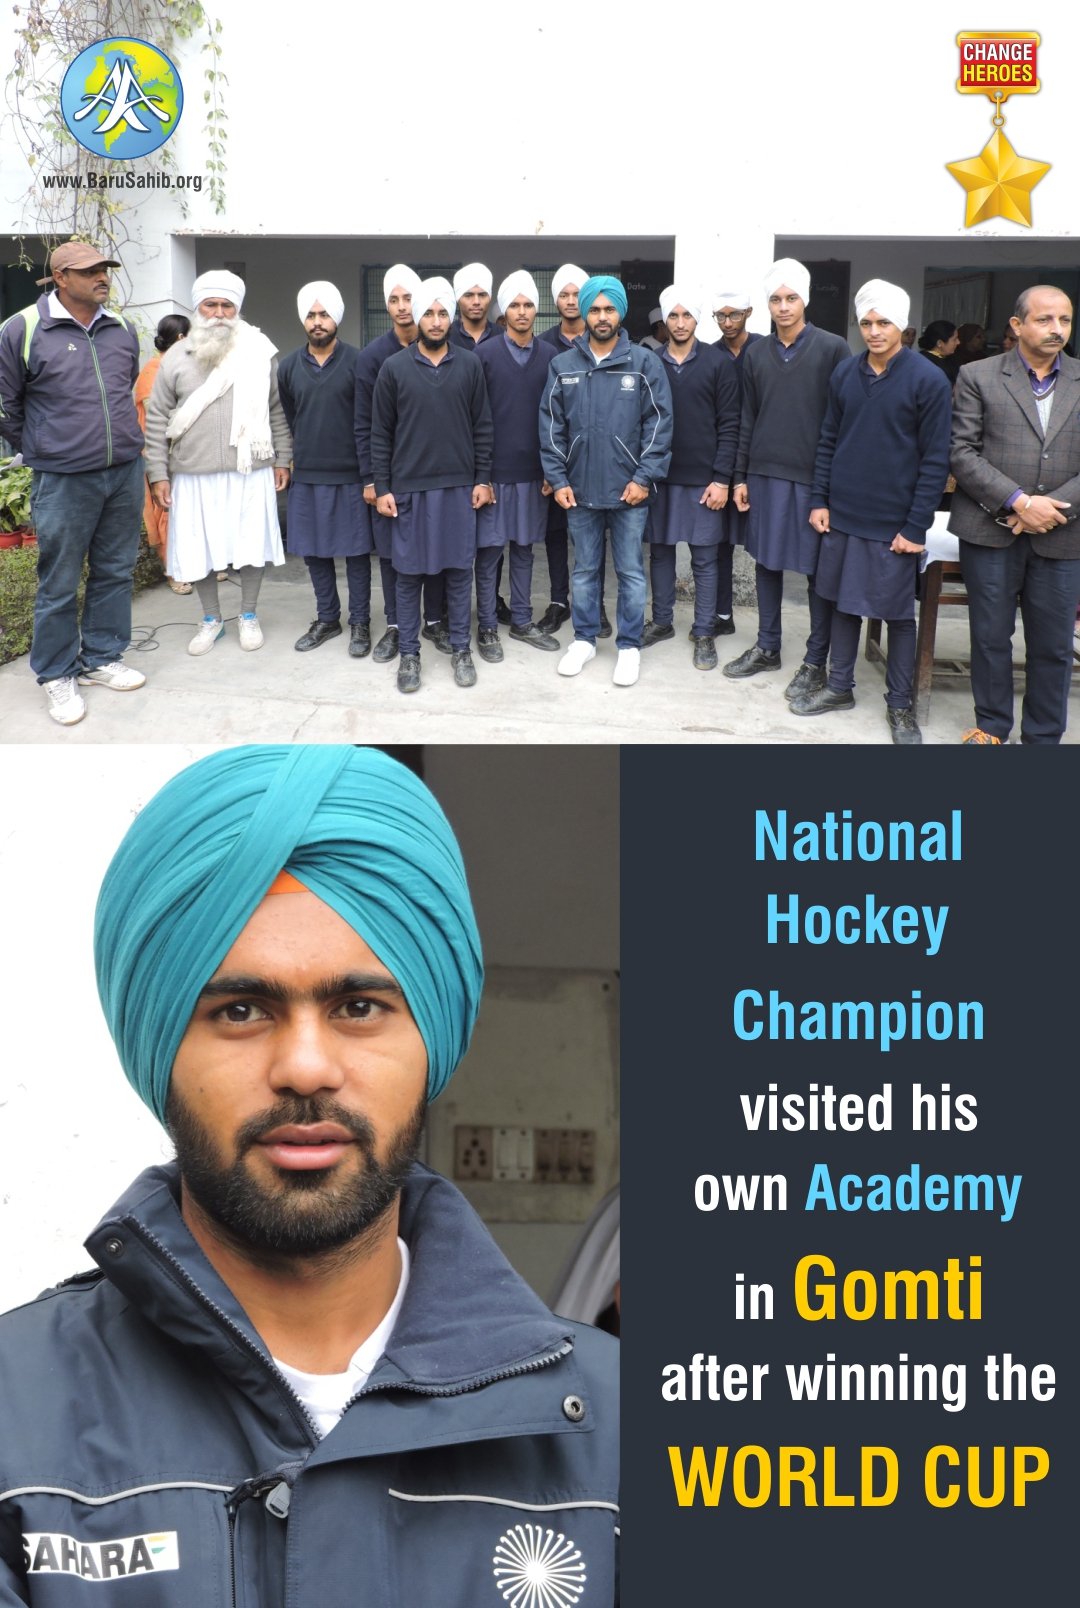 National-Hockey-Champion-visited-their-own-Academy-in-Gomti-after-winning-the-WORLD-CUP